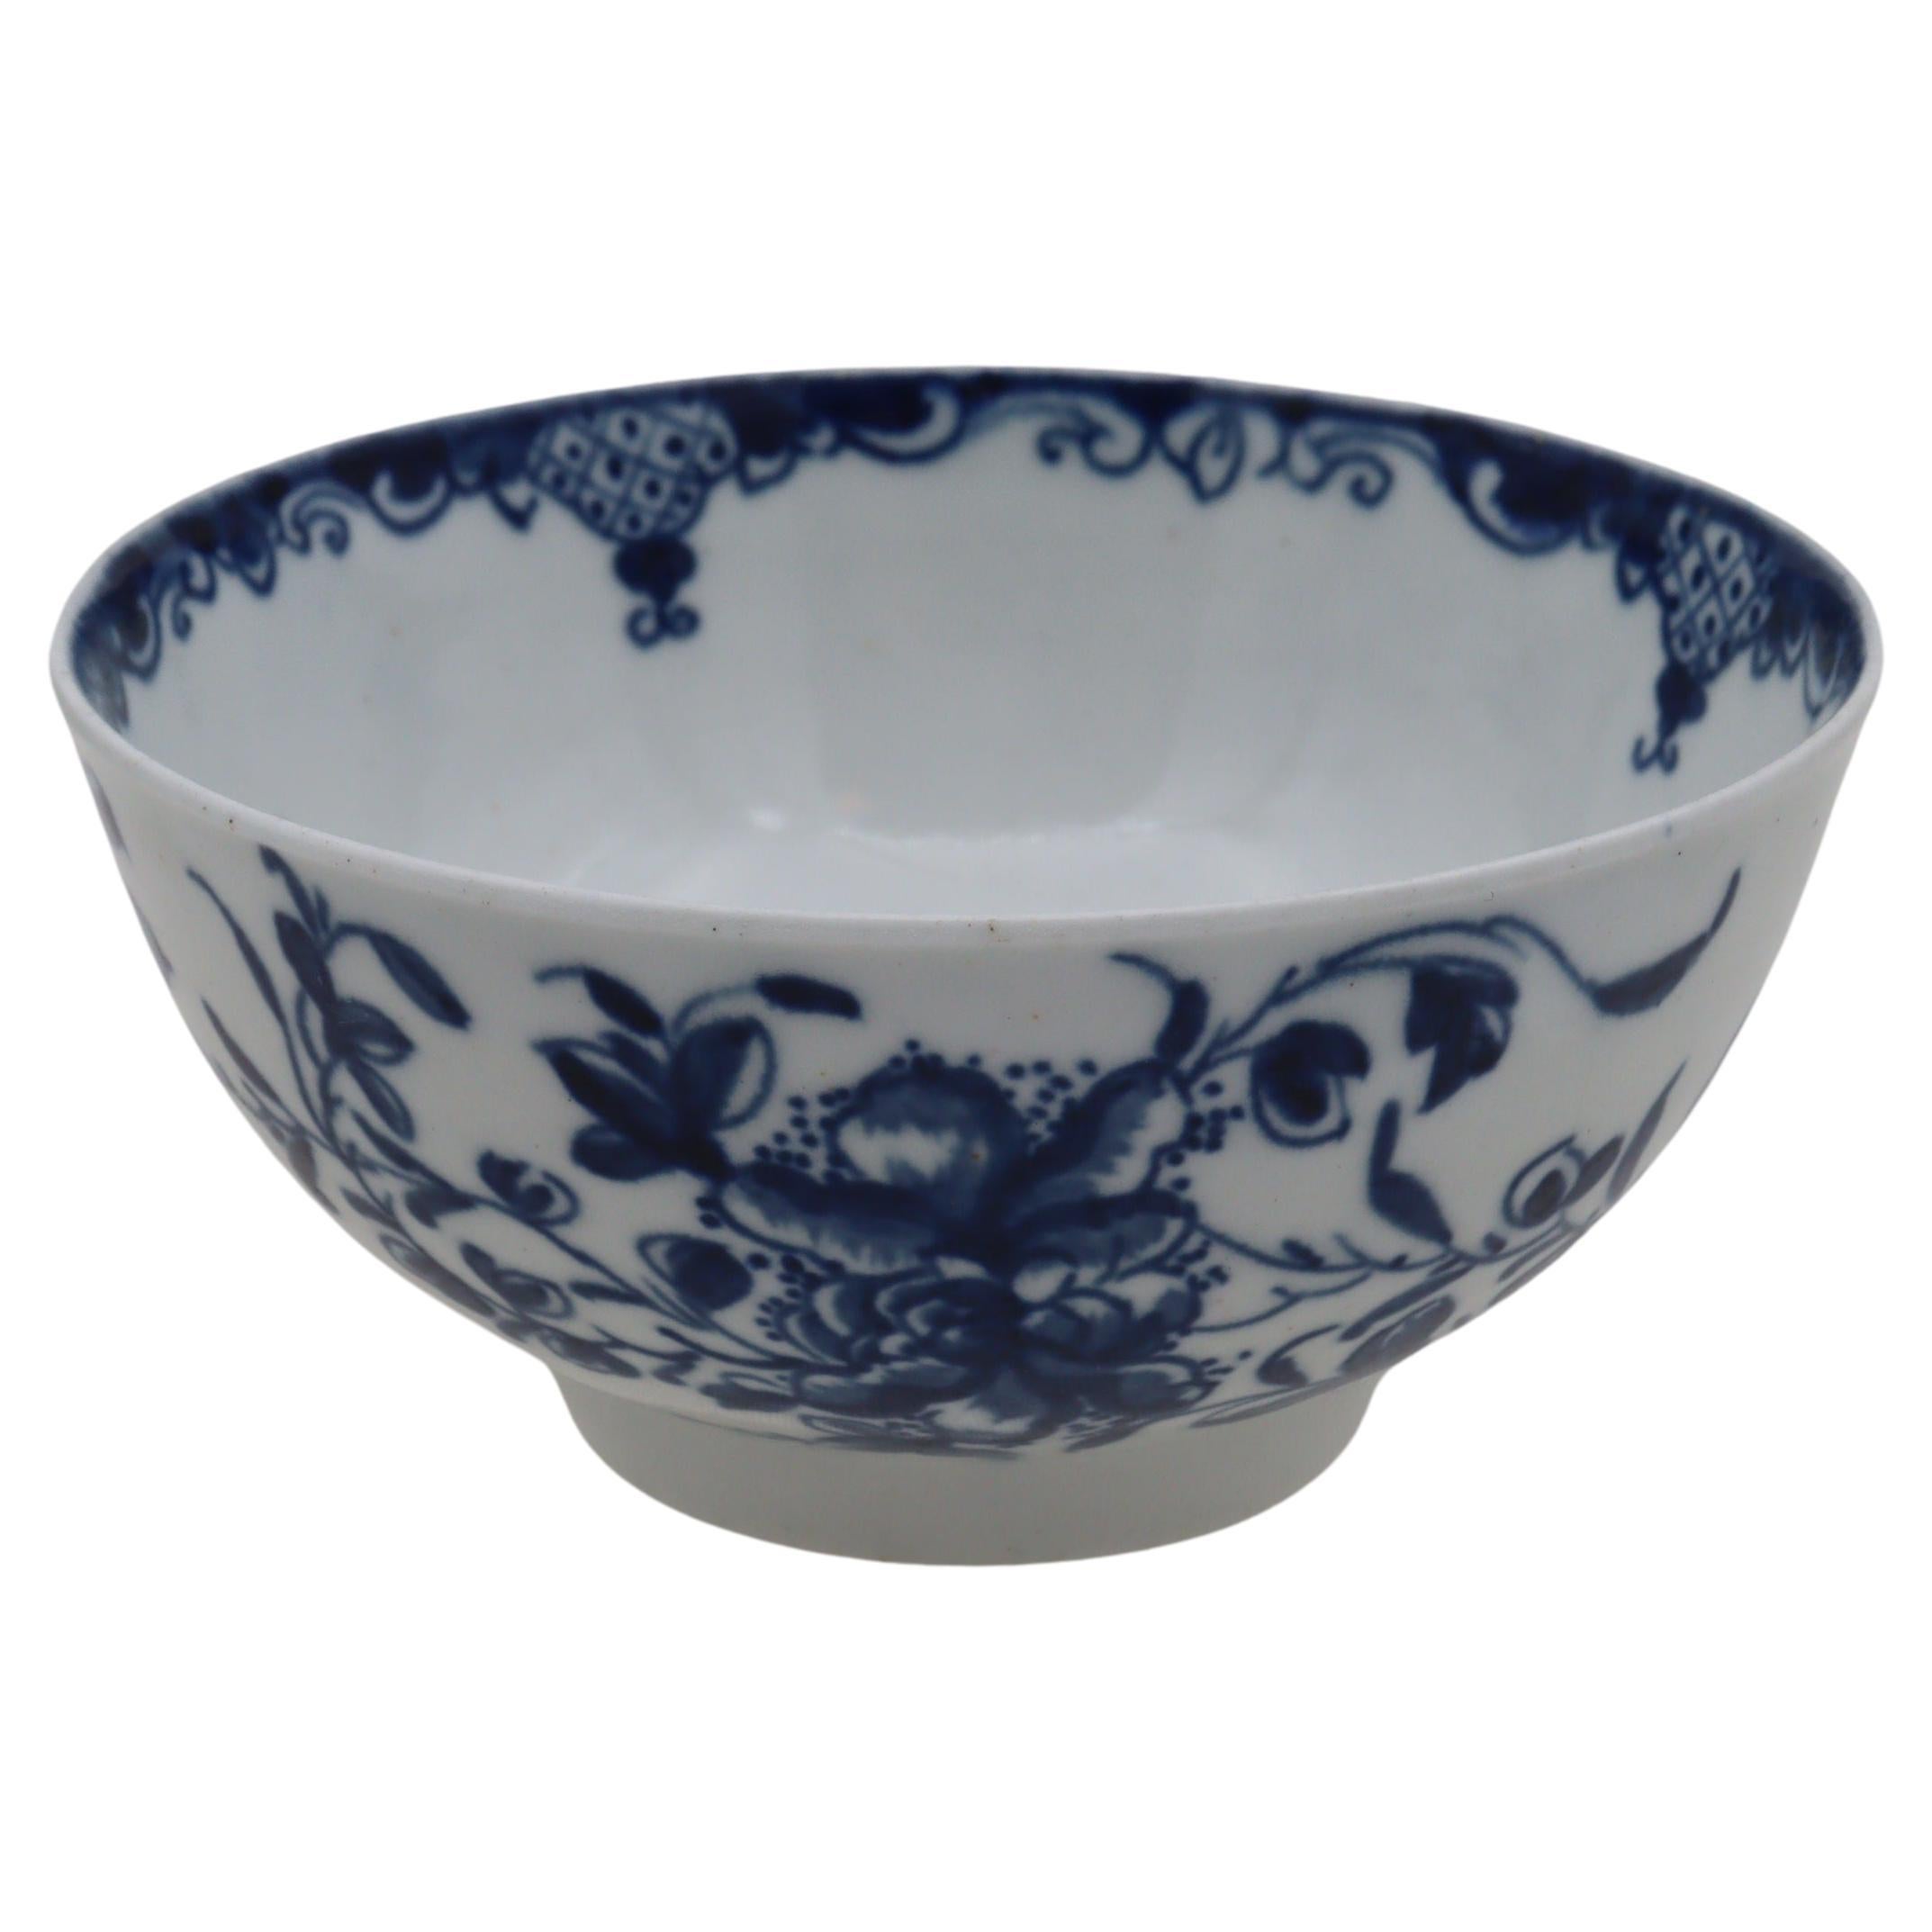 First period Worcester hand painted blue and white bowl Mansfield pattern.